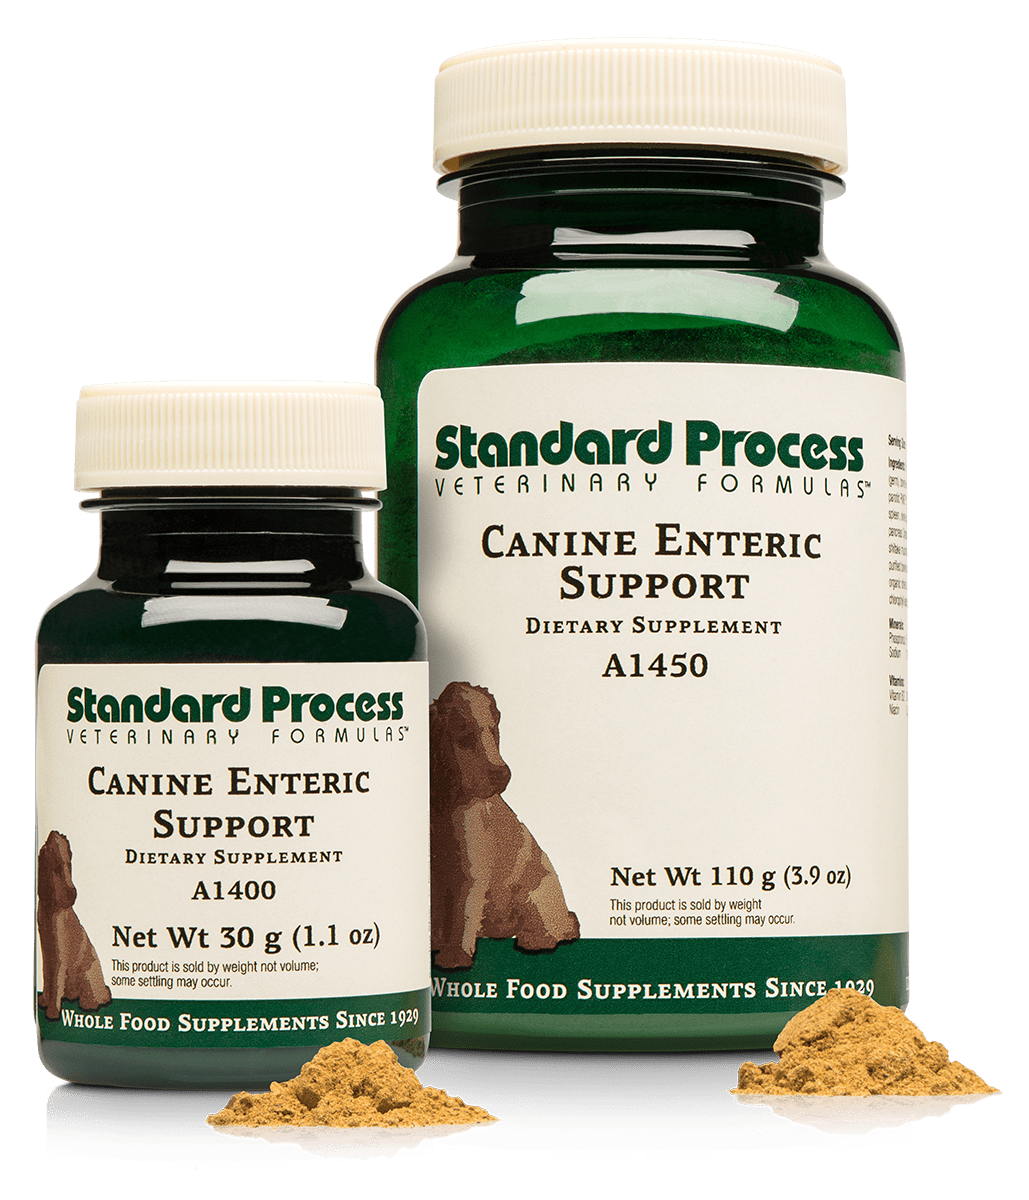 Standard Process Canine Enteric Support 30g powder